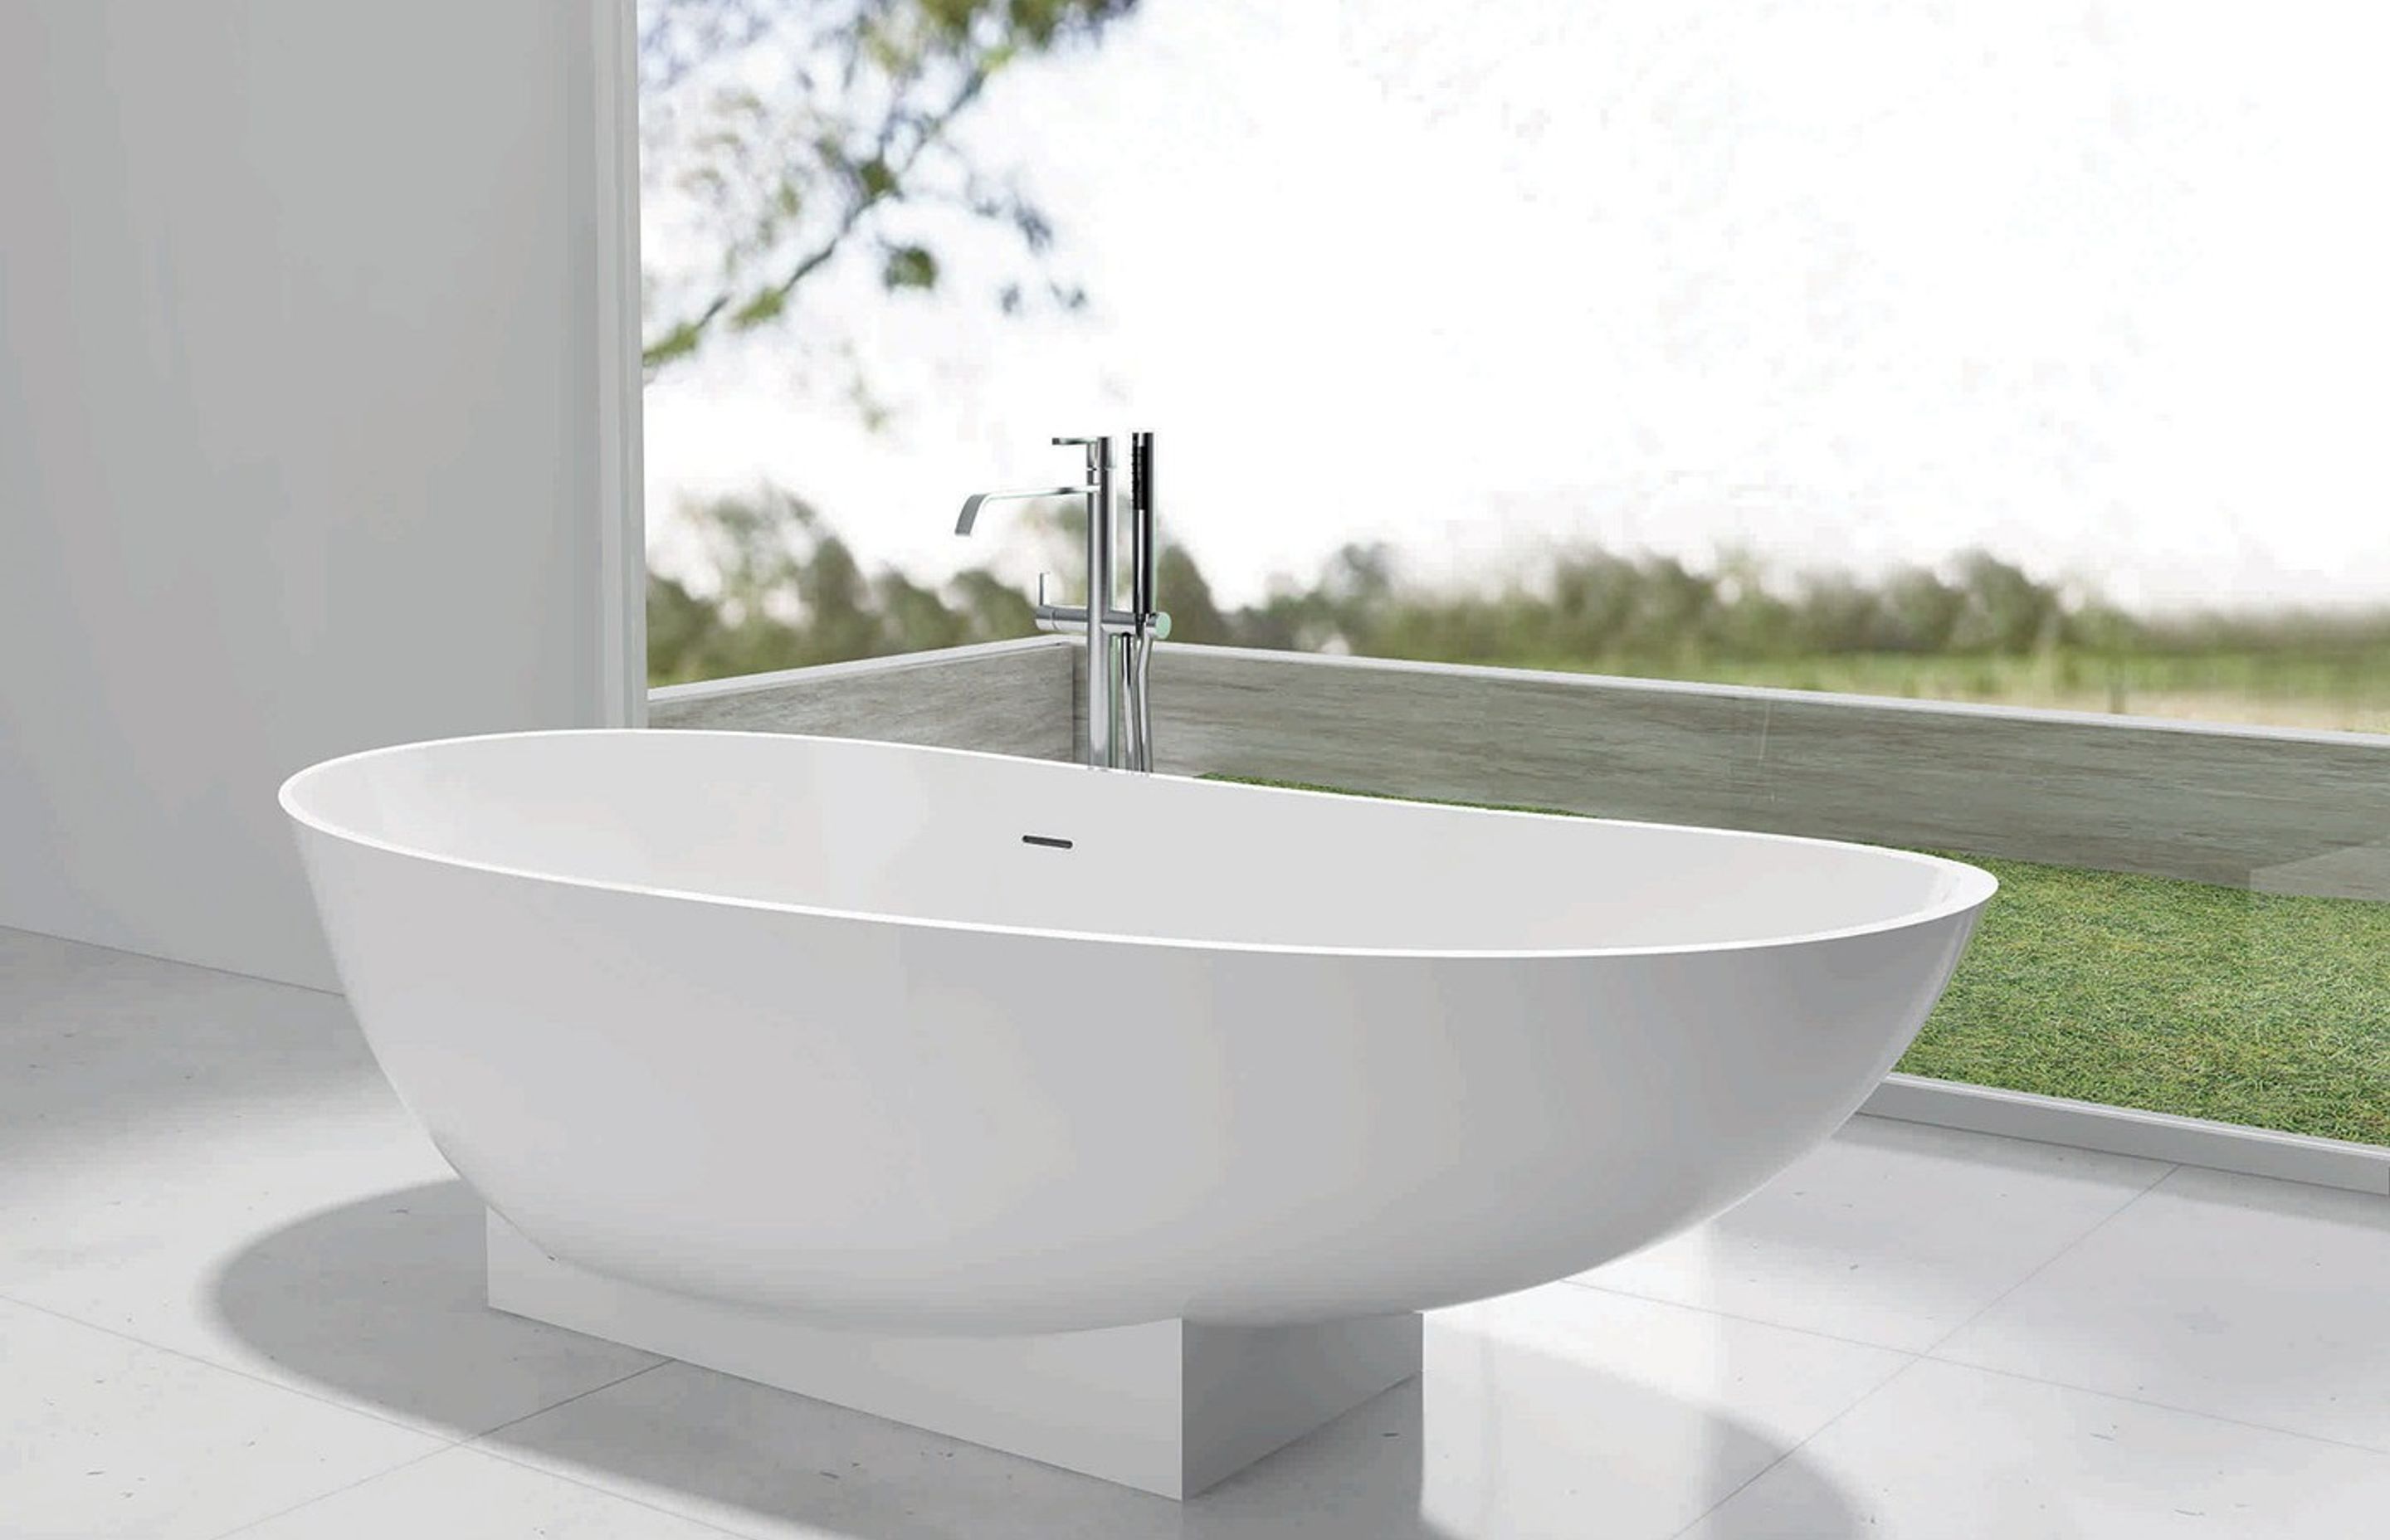 One of the critical factors to consider when designing your bathroom is the placement of the bath. This Perla free-standing bath has been placed directly in the window to make it a feature.